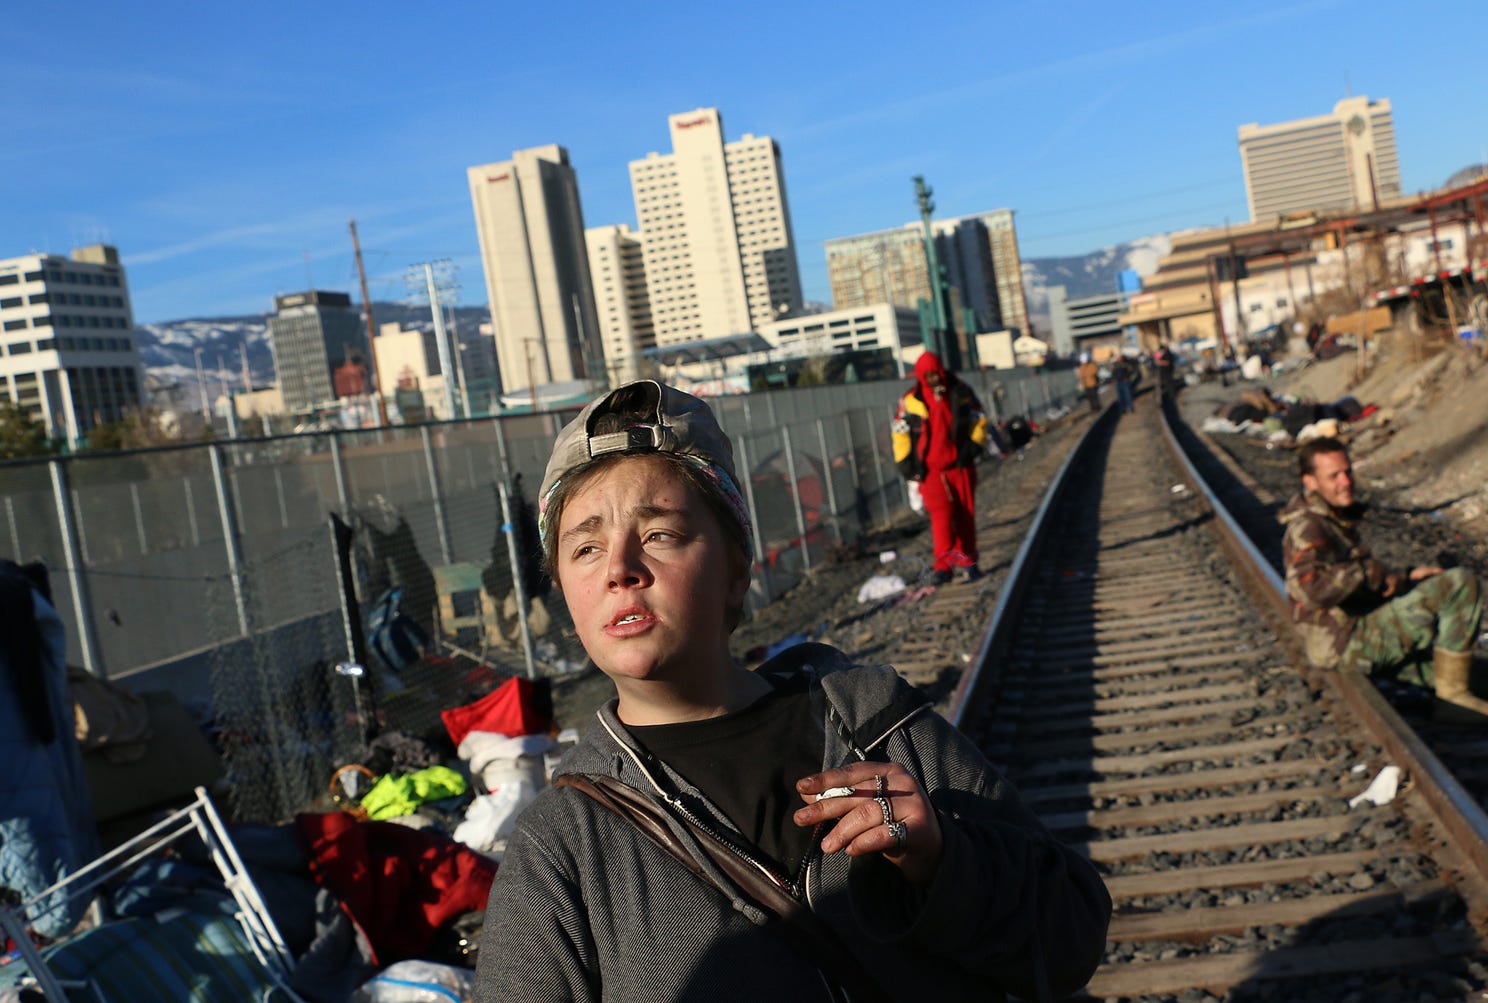 19 year old Moriah Stovall smokes a cigarette while getting evicted from a homeless encampment along the railroad tracks in Reno on March 4, 2020.